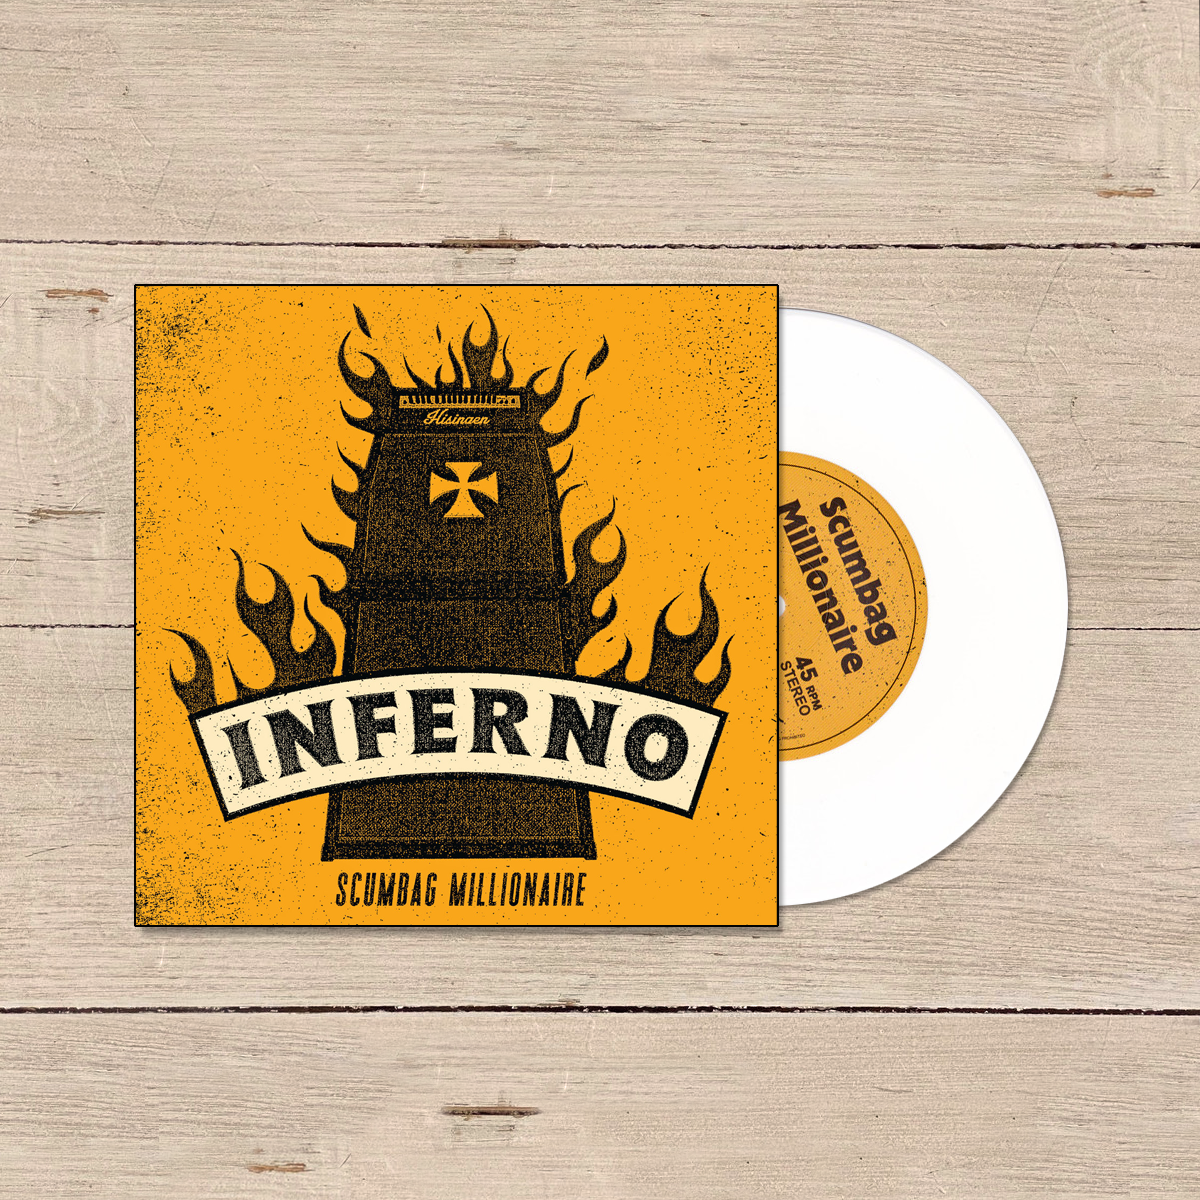 Scumbag Millionaire- Inferno 7" ~RARE WHITE WAX / HELLACOPTERS!